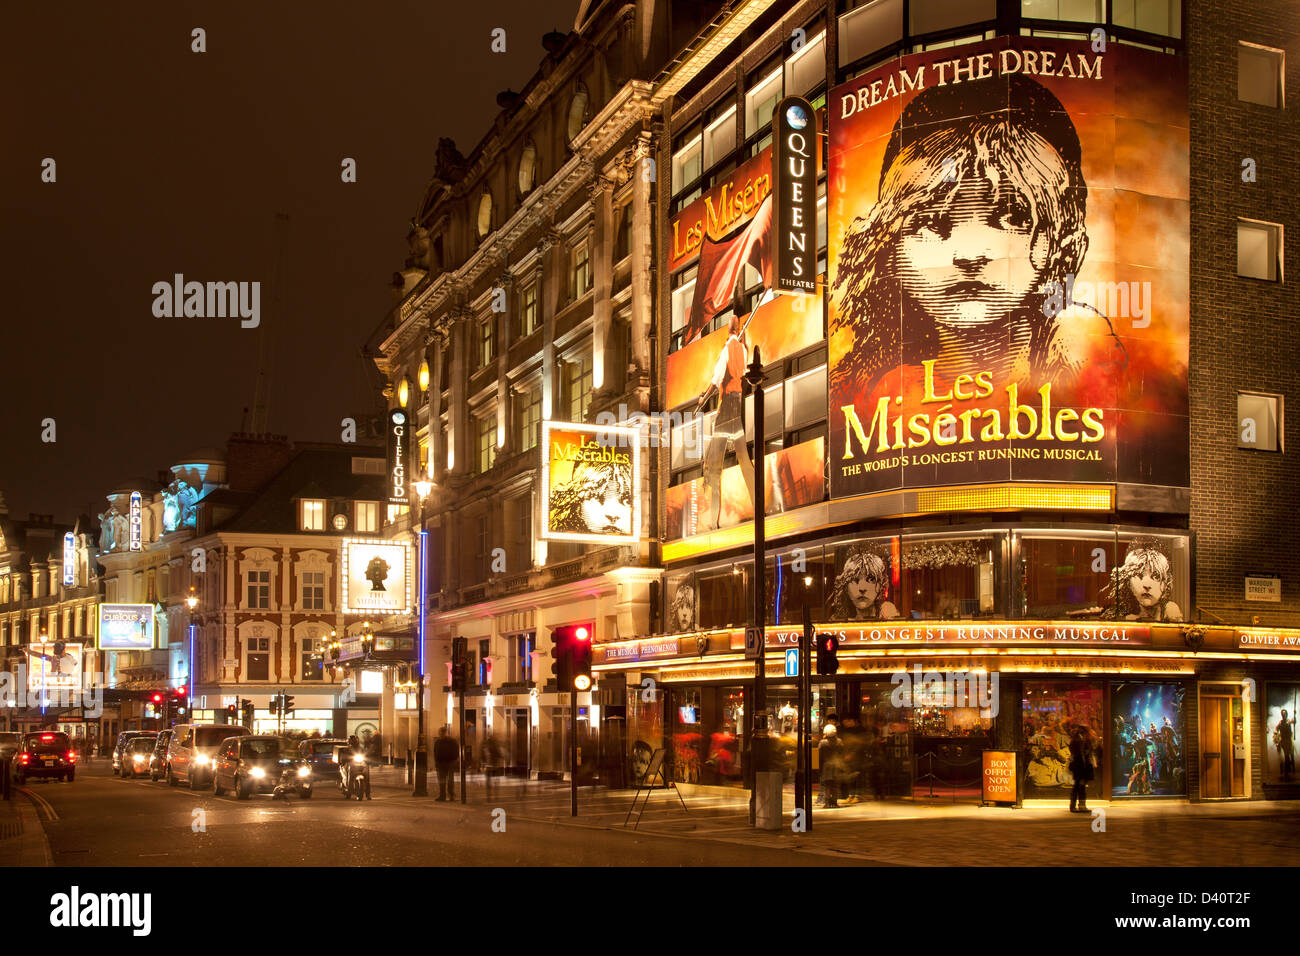 Heart of London theatreland, Shaftesbury Avenue: Queens Theatre with Les Miserables, Gielgud, Apollo and Lyric theatres at night Stock Photo